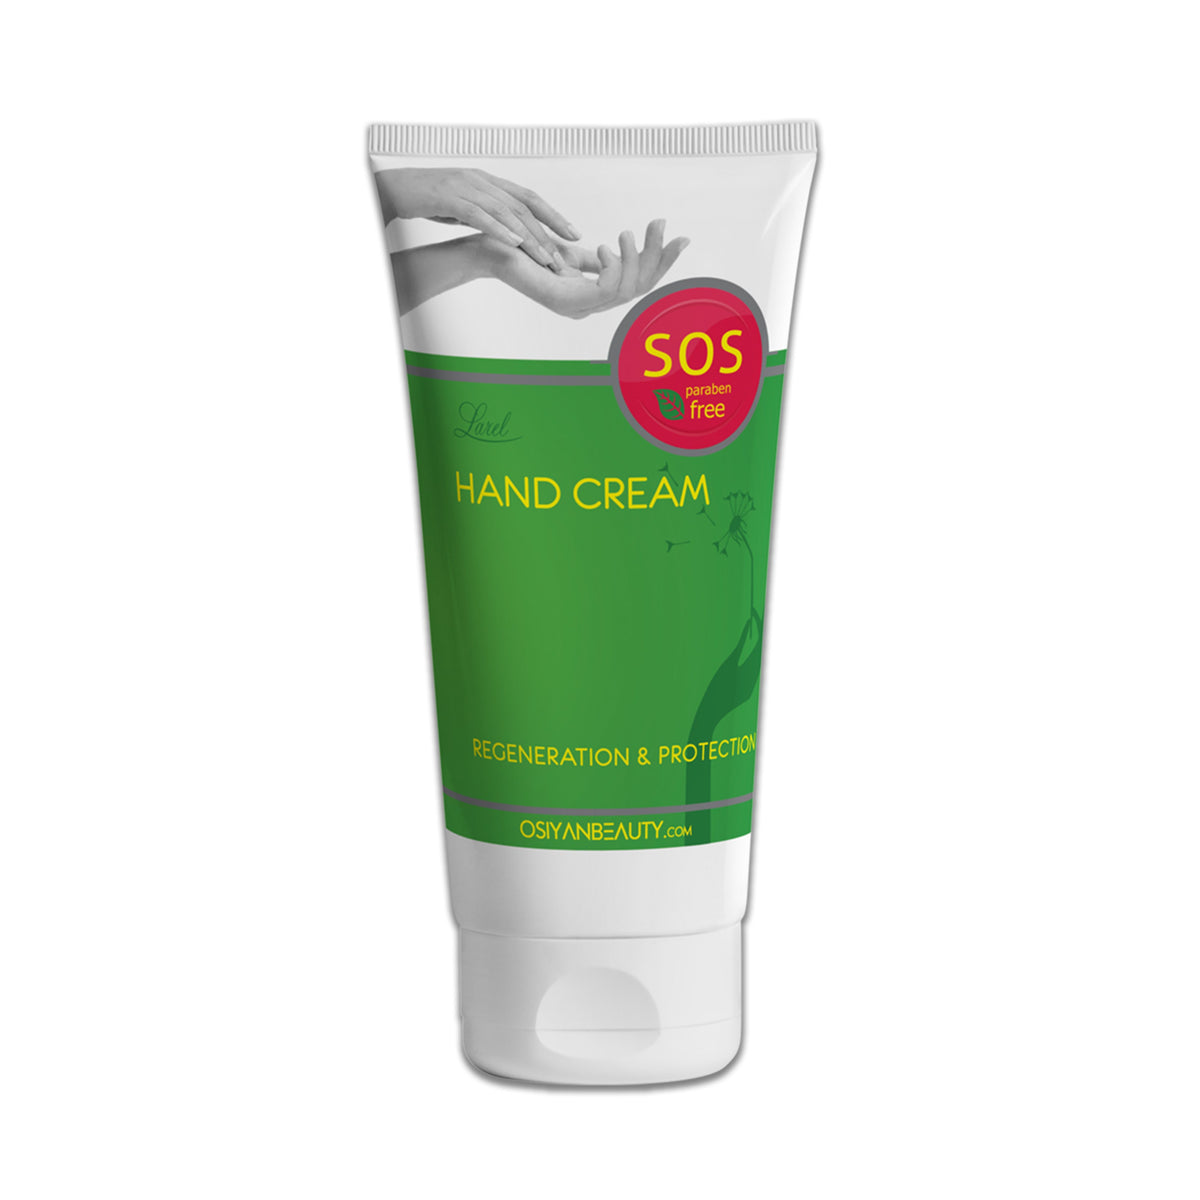 Hand Cream Regeneration & Protection (made in Europe)